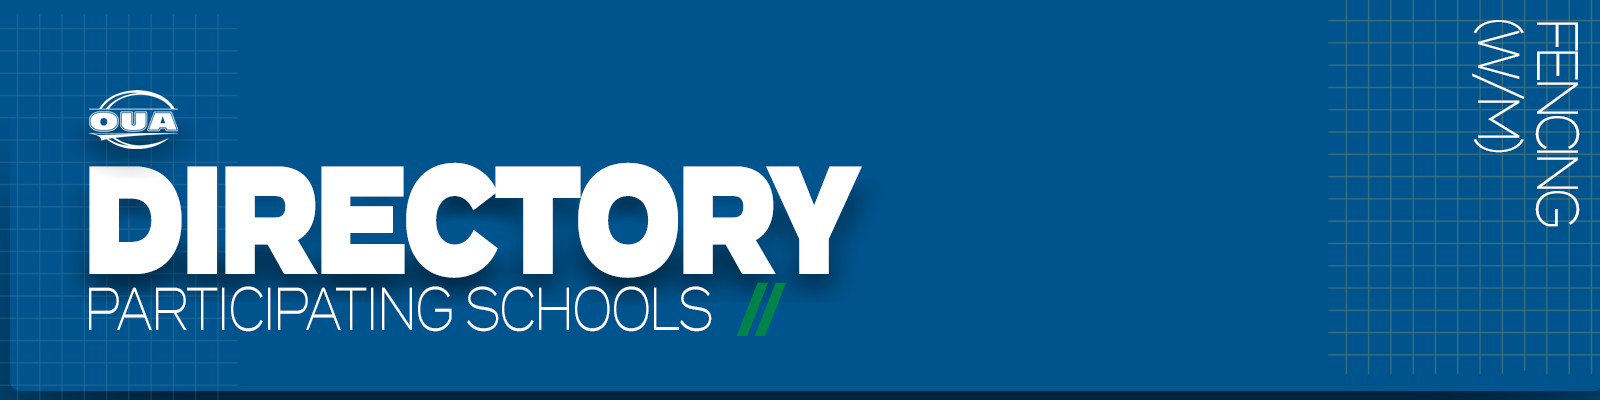 Predominantly blue graphic with large white text on the left side that reads 'Directory, Participating Schools' and small white vertical text on the right side that reads 'Fencing'